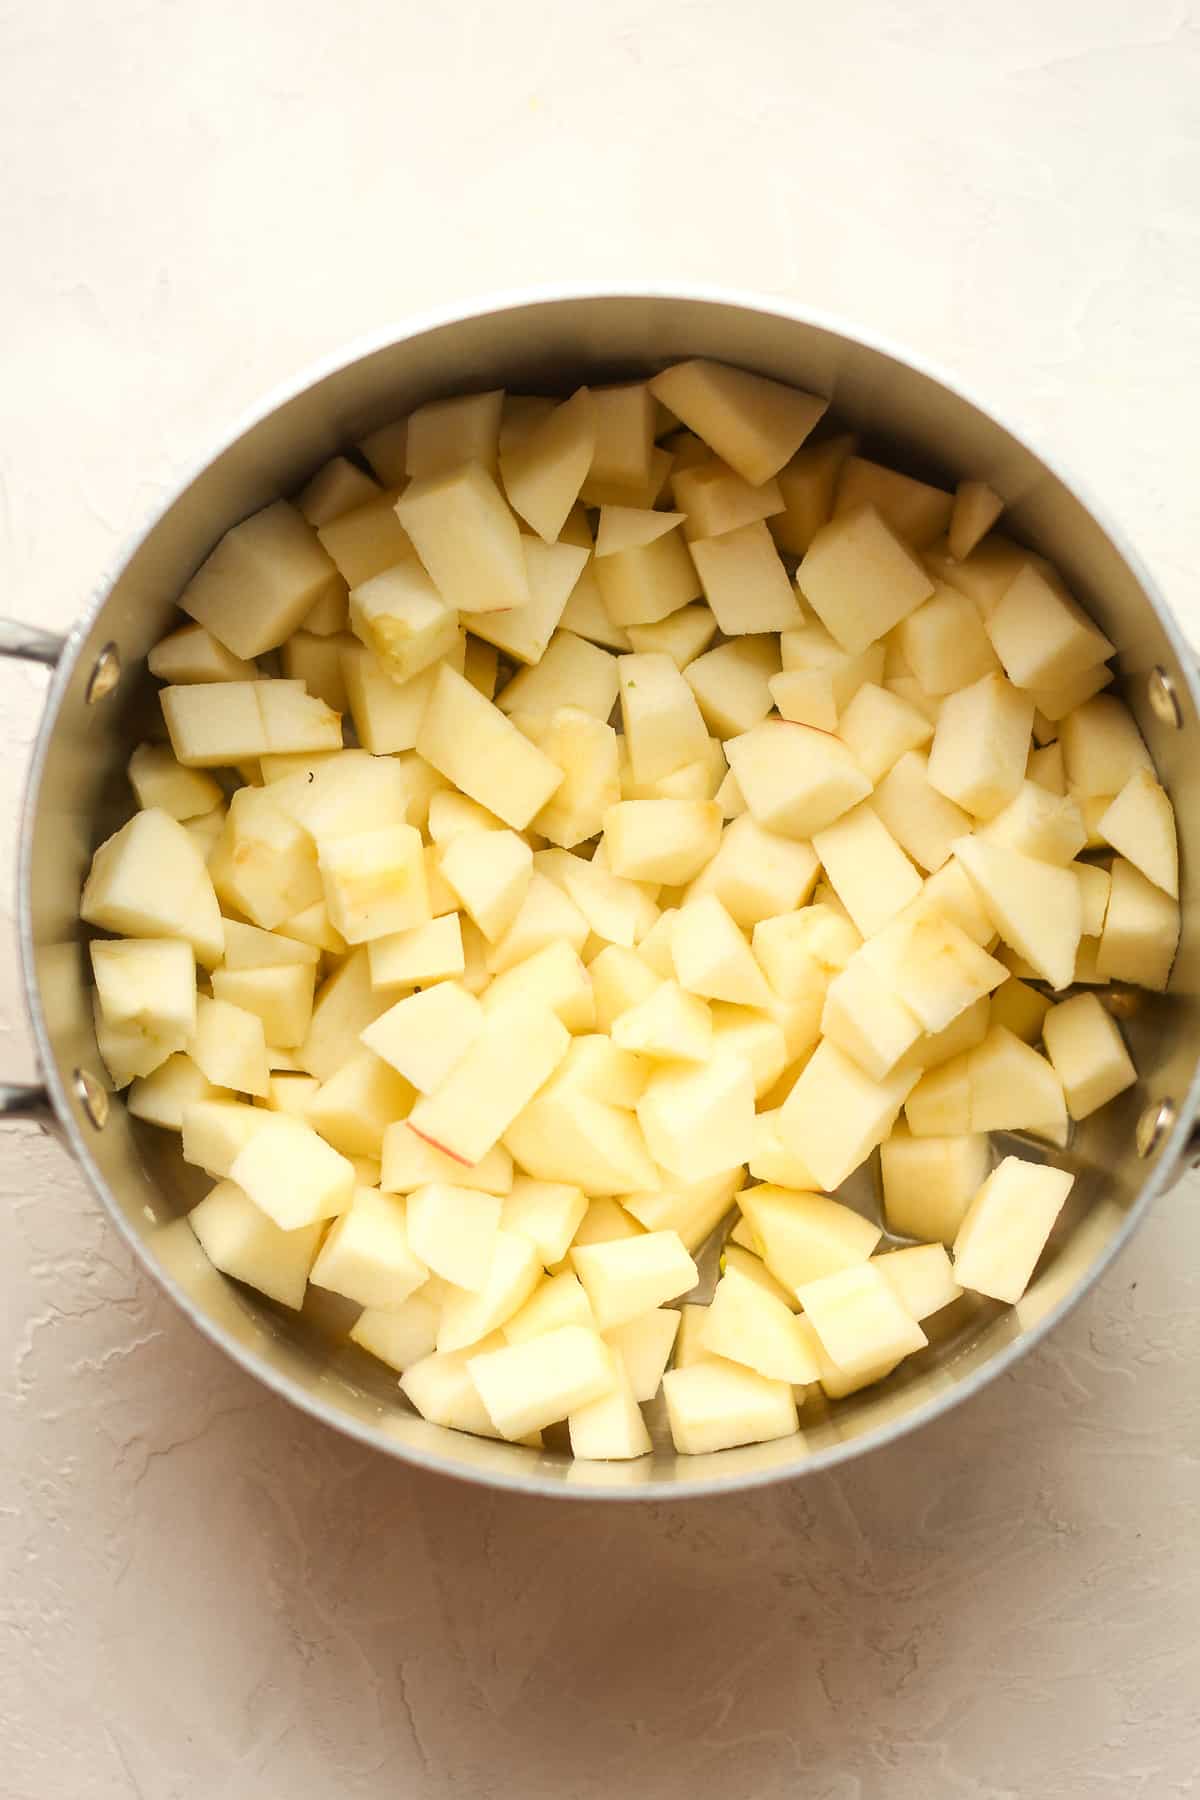 A pan of the chopped apples.